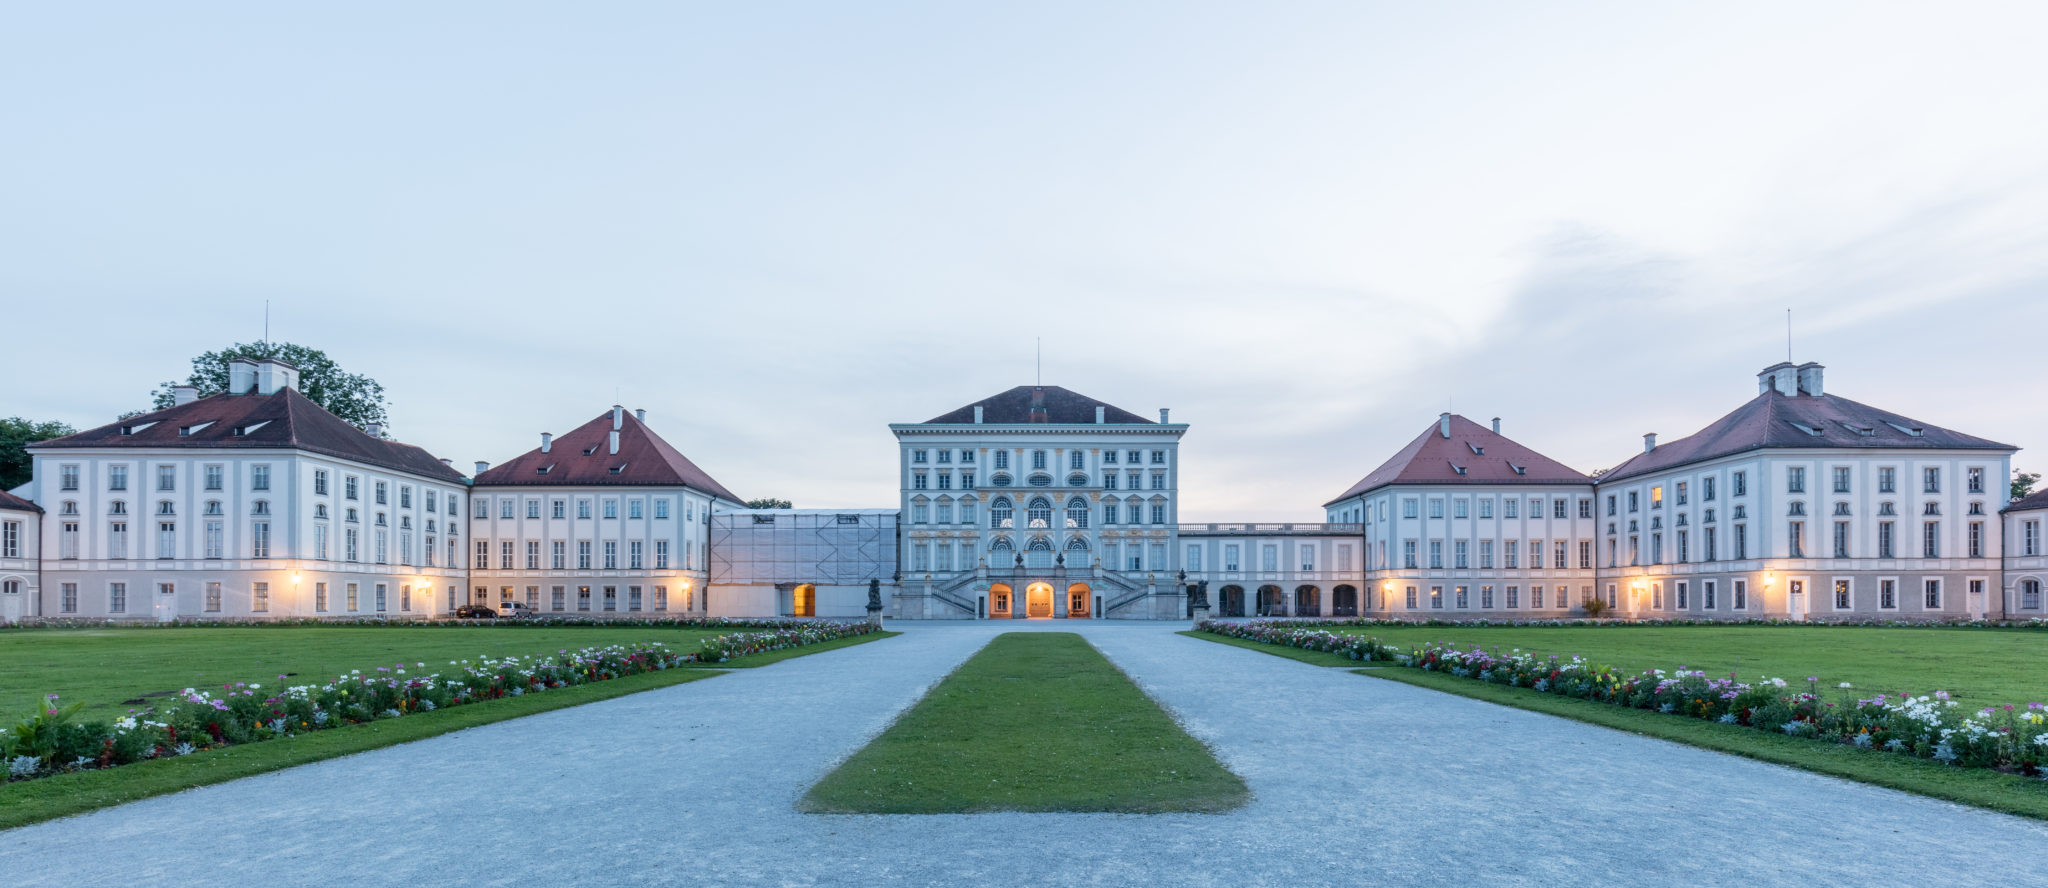 Nymphenburg Palace - Top 10 Things to See and Do in Munich, Germany